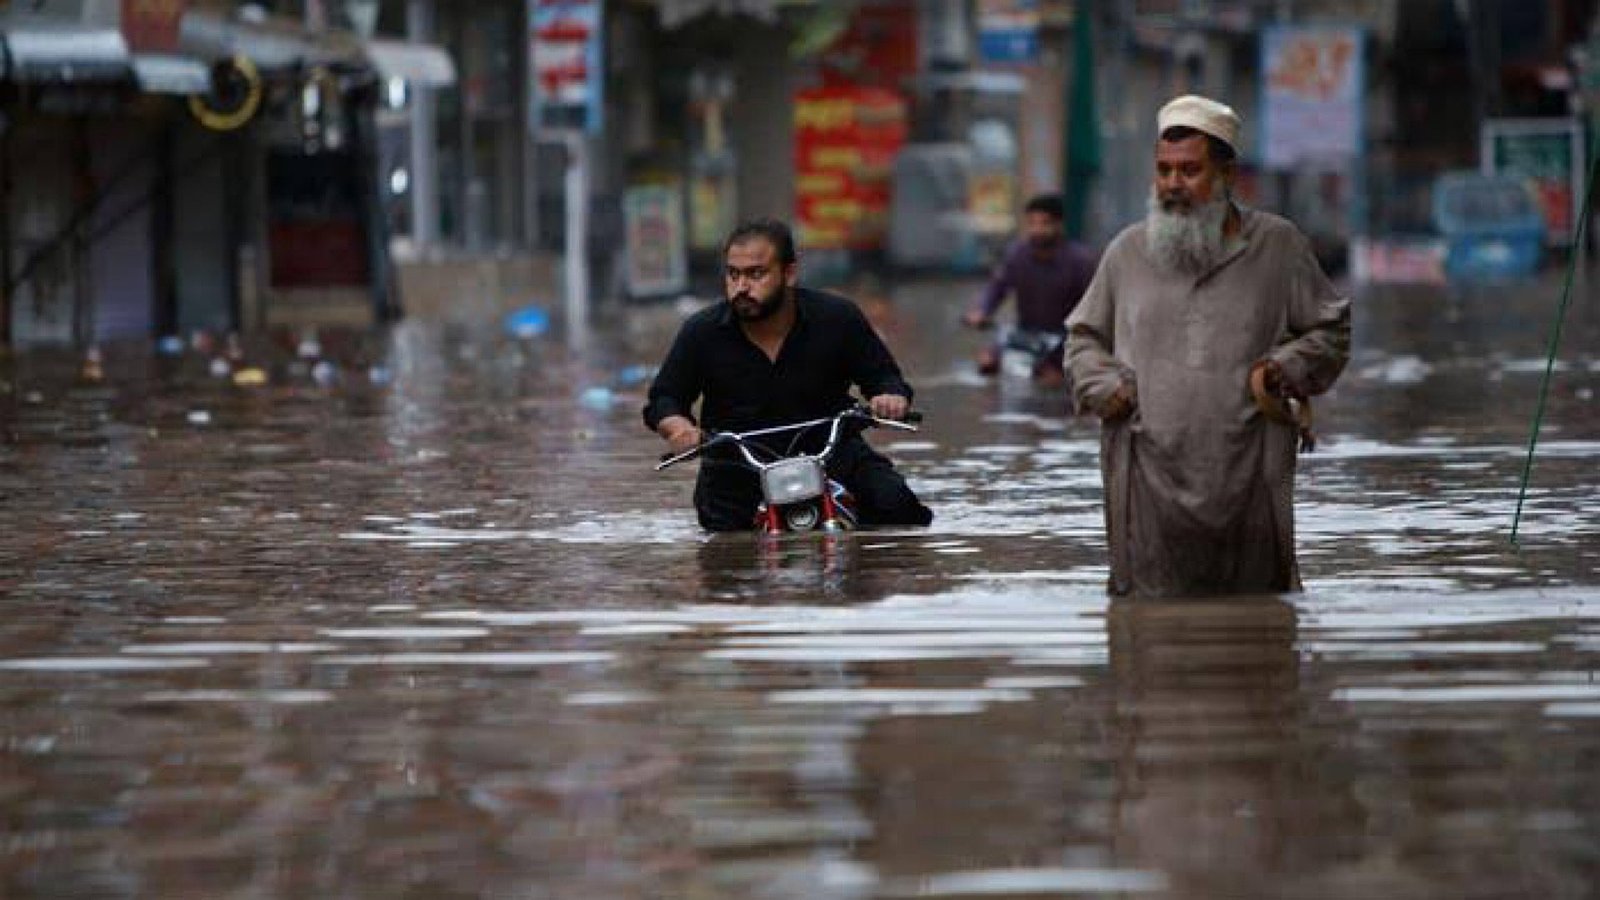 Pakistan Recorded Highest Rainfall in April Since 1961: PMD Report